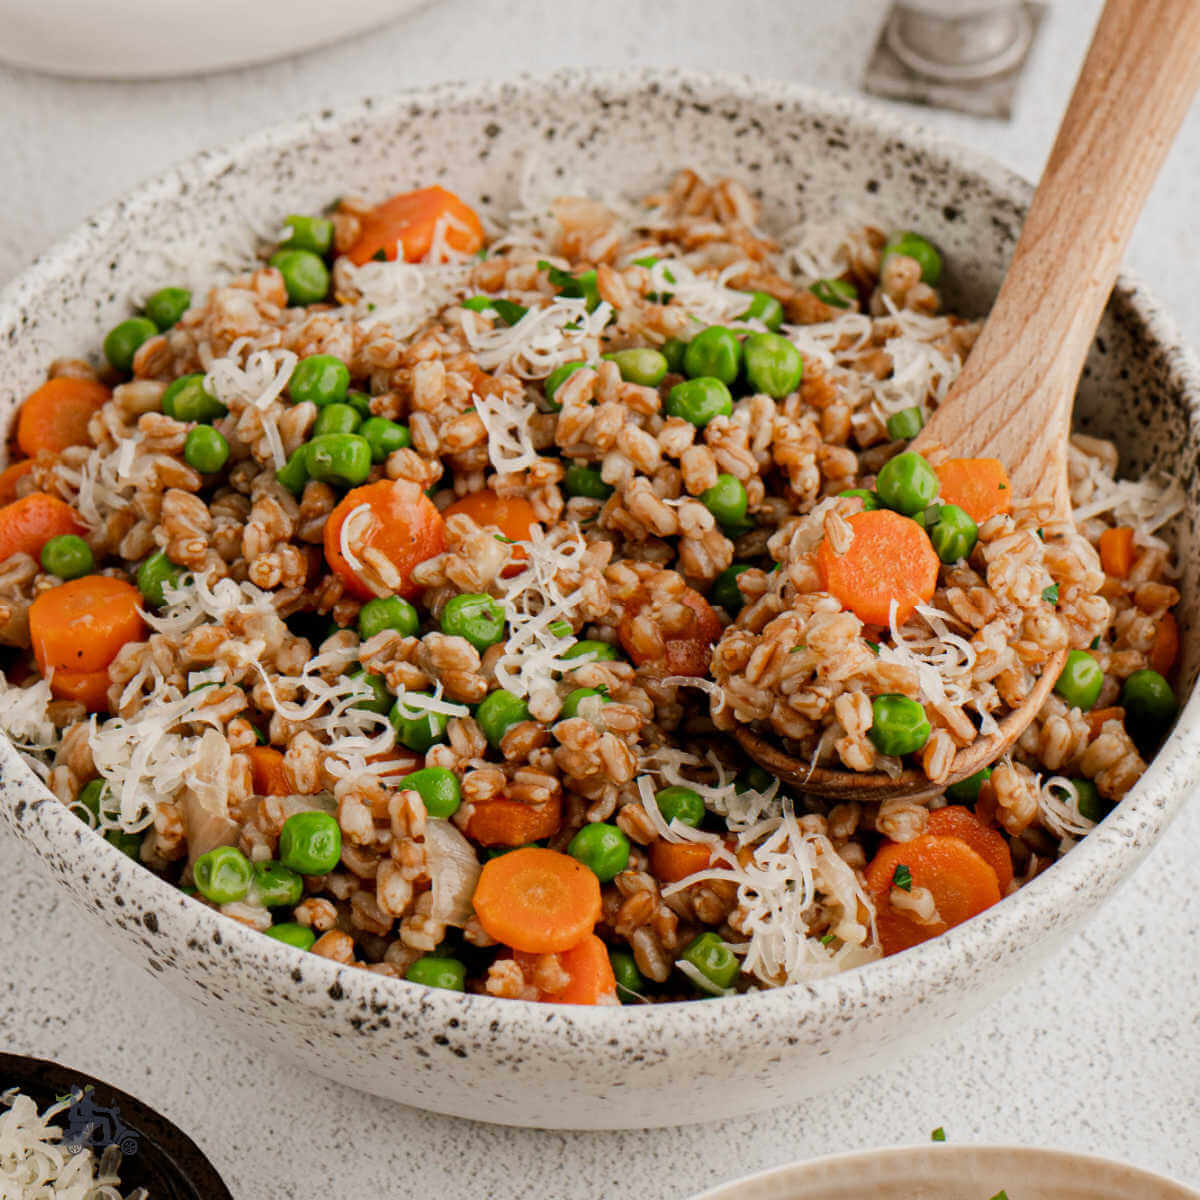 A bowl filled with creamy farro, peas, and carrots to resemble the Classic Venetian dish of Risi Bisi.